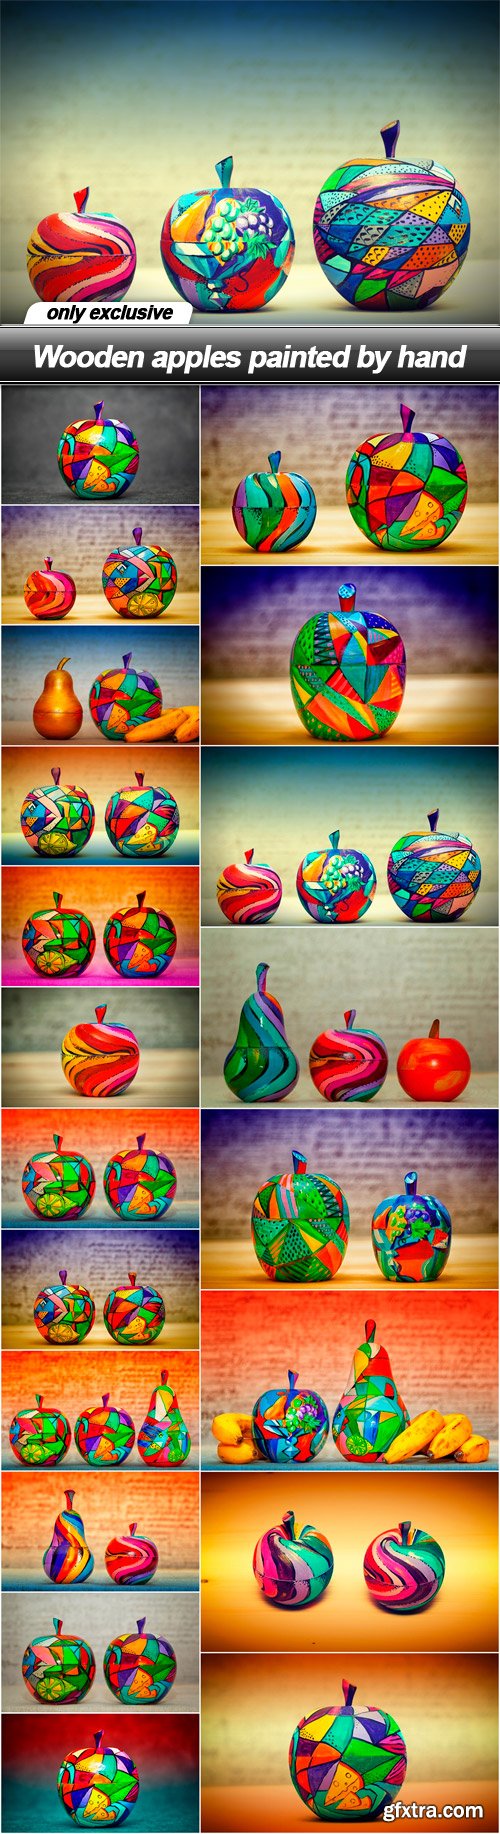 Wooden apples painted by hand - 20 UHQ JPEG